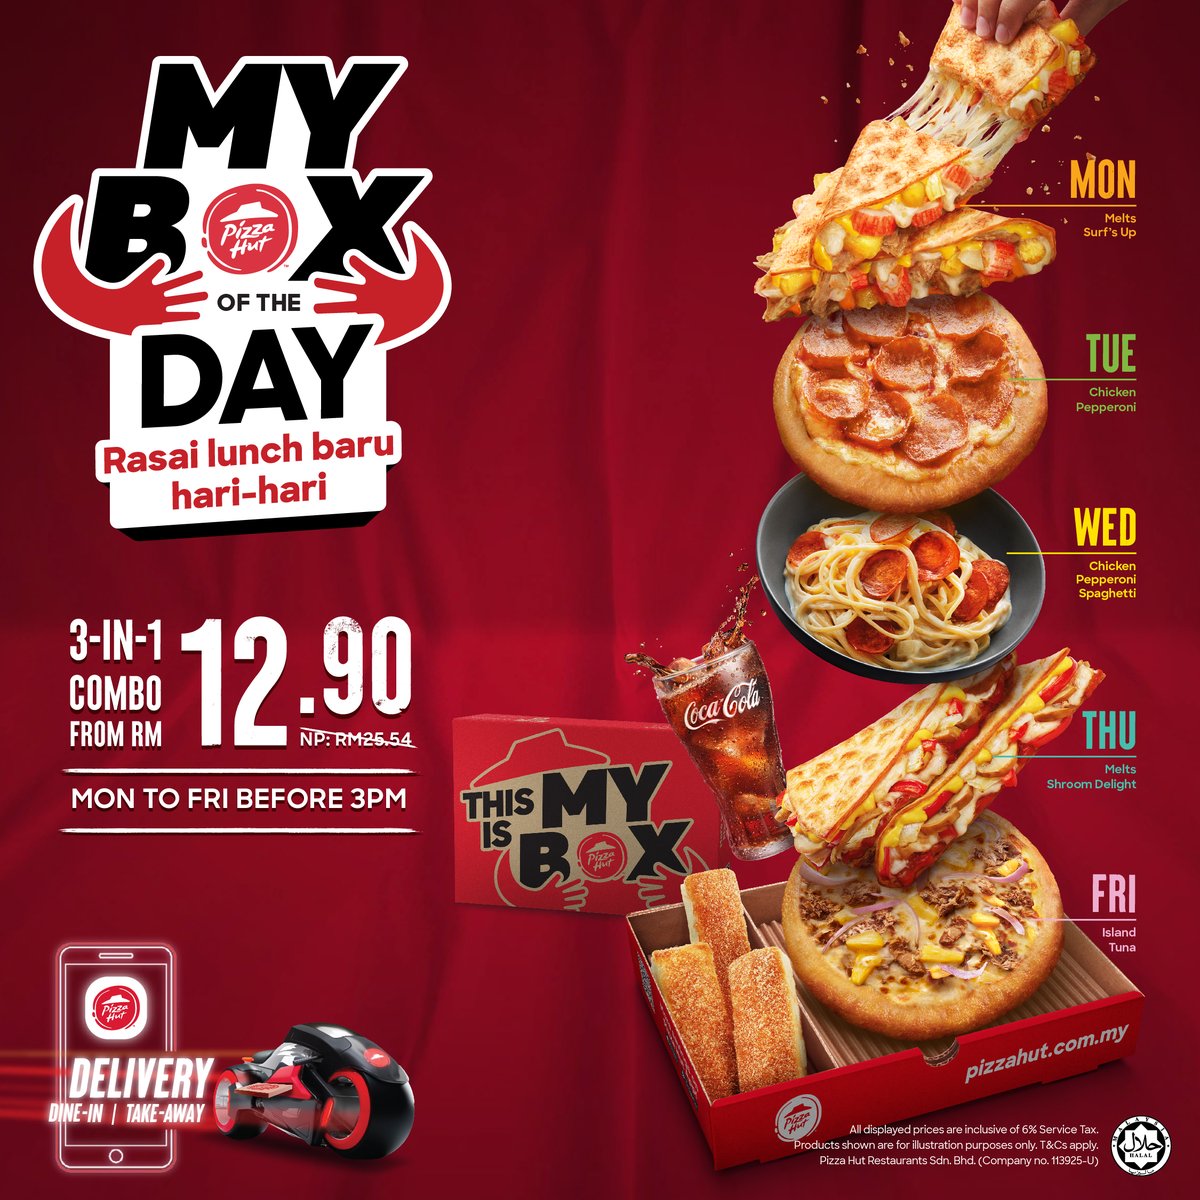 New Year New Lunch! 🍕 No more headache over #MakanApaHariIni! MyBox boleh settle 👍 Introducing the new #MyBoxOfTheDay promo. Enjoy new rasa everyday from only RM12.90. Promo valid Mon-Fri before 3PM. It's simple. Order je, we deliver 🏍 #PizzaHutMalaysia #LunchBetterTogether